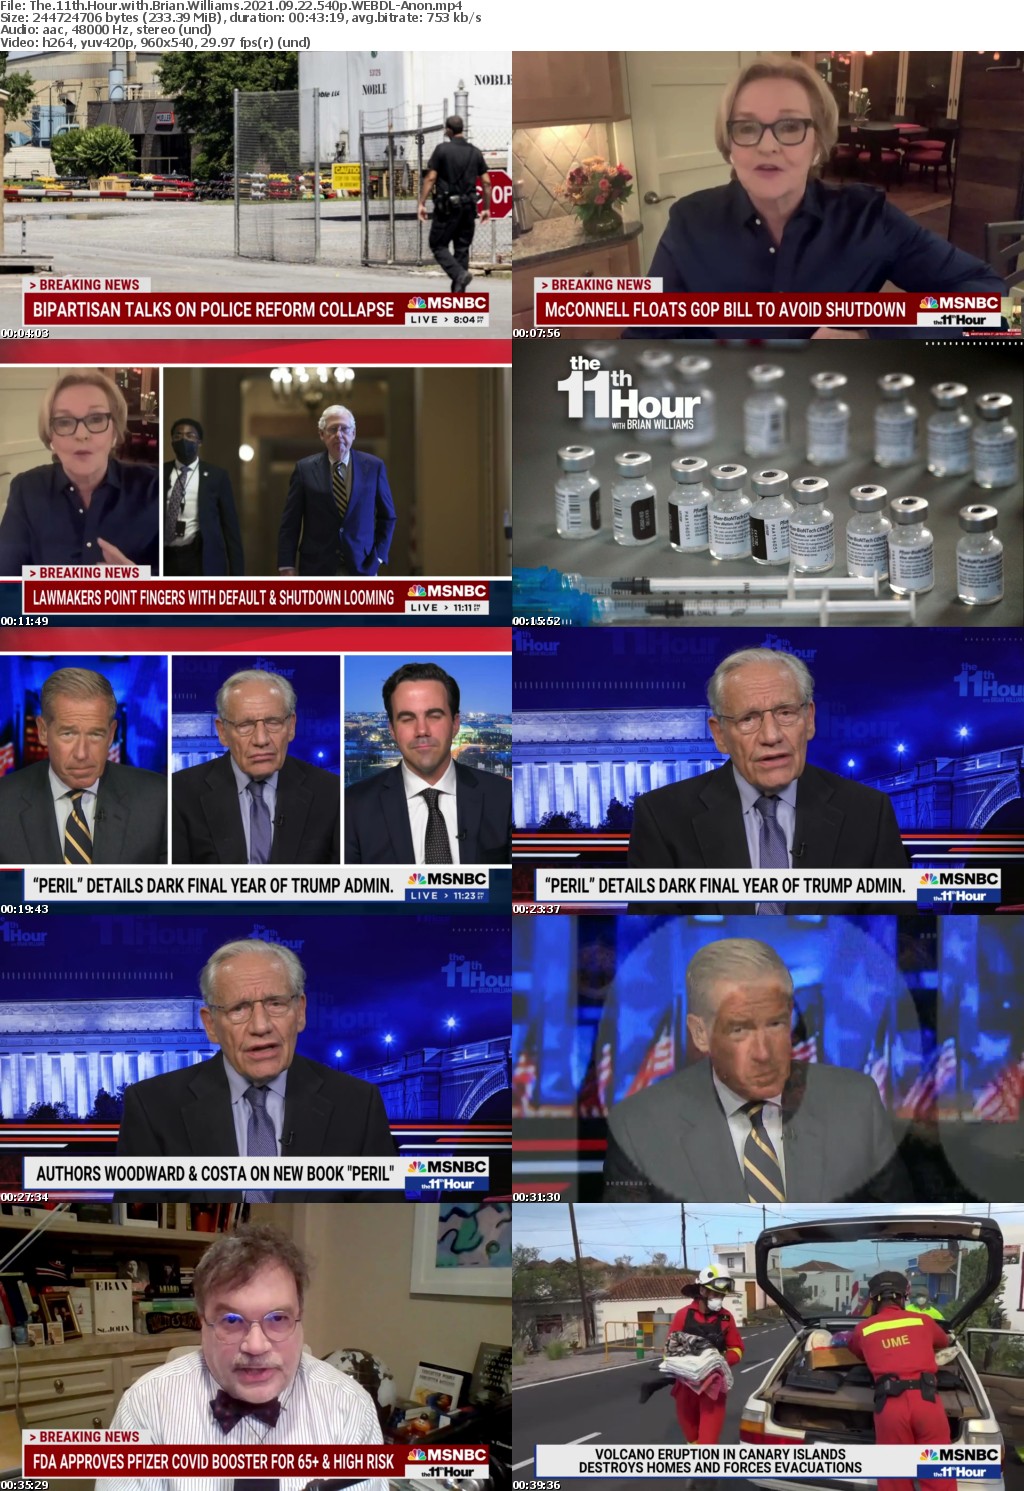 The 11th Hour with Brian Williams 2021 09 22 540p WEBDL-Anon